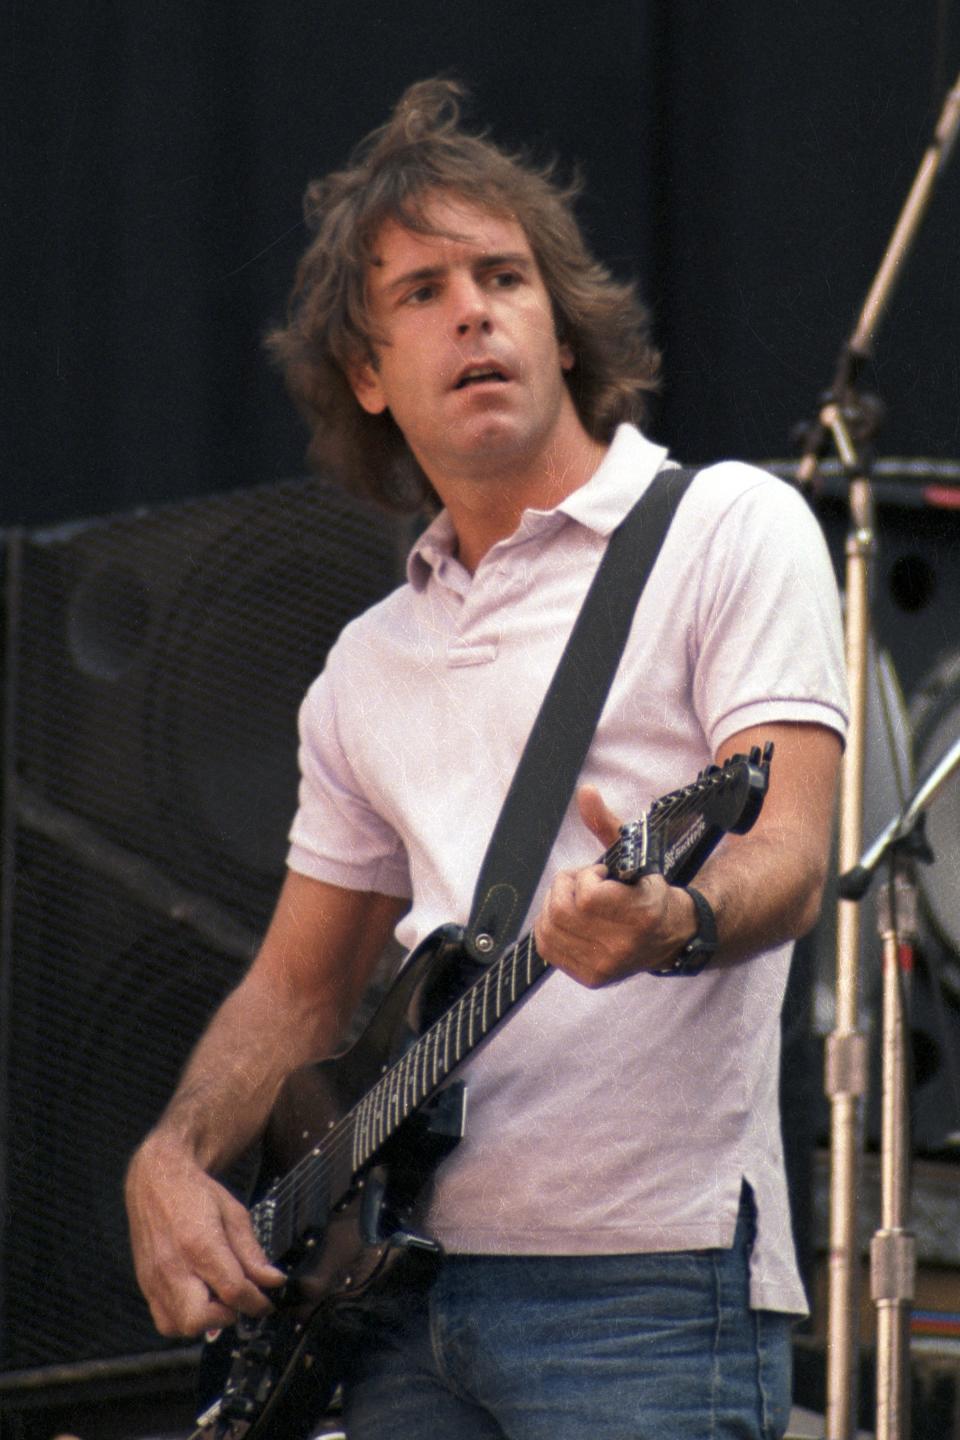 Bob Weir performs with The Grateful Dead at the Greek Theatre in Berkeley, California, on June 16, 1985.